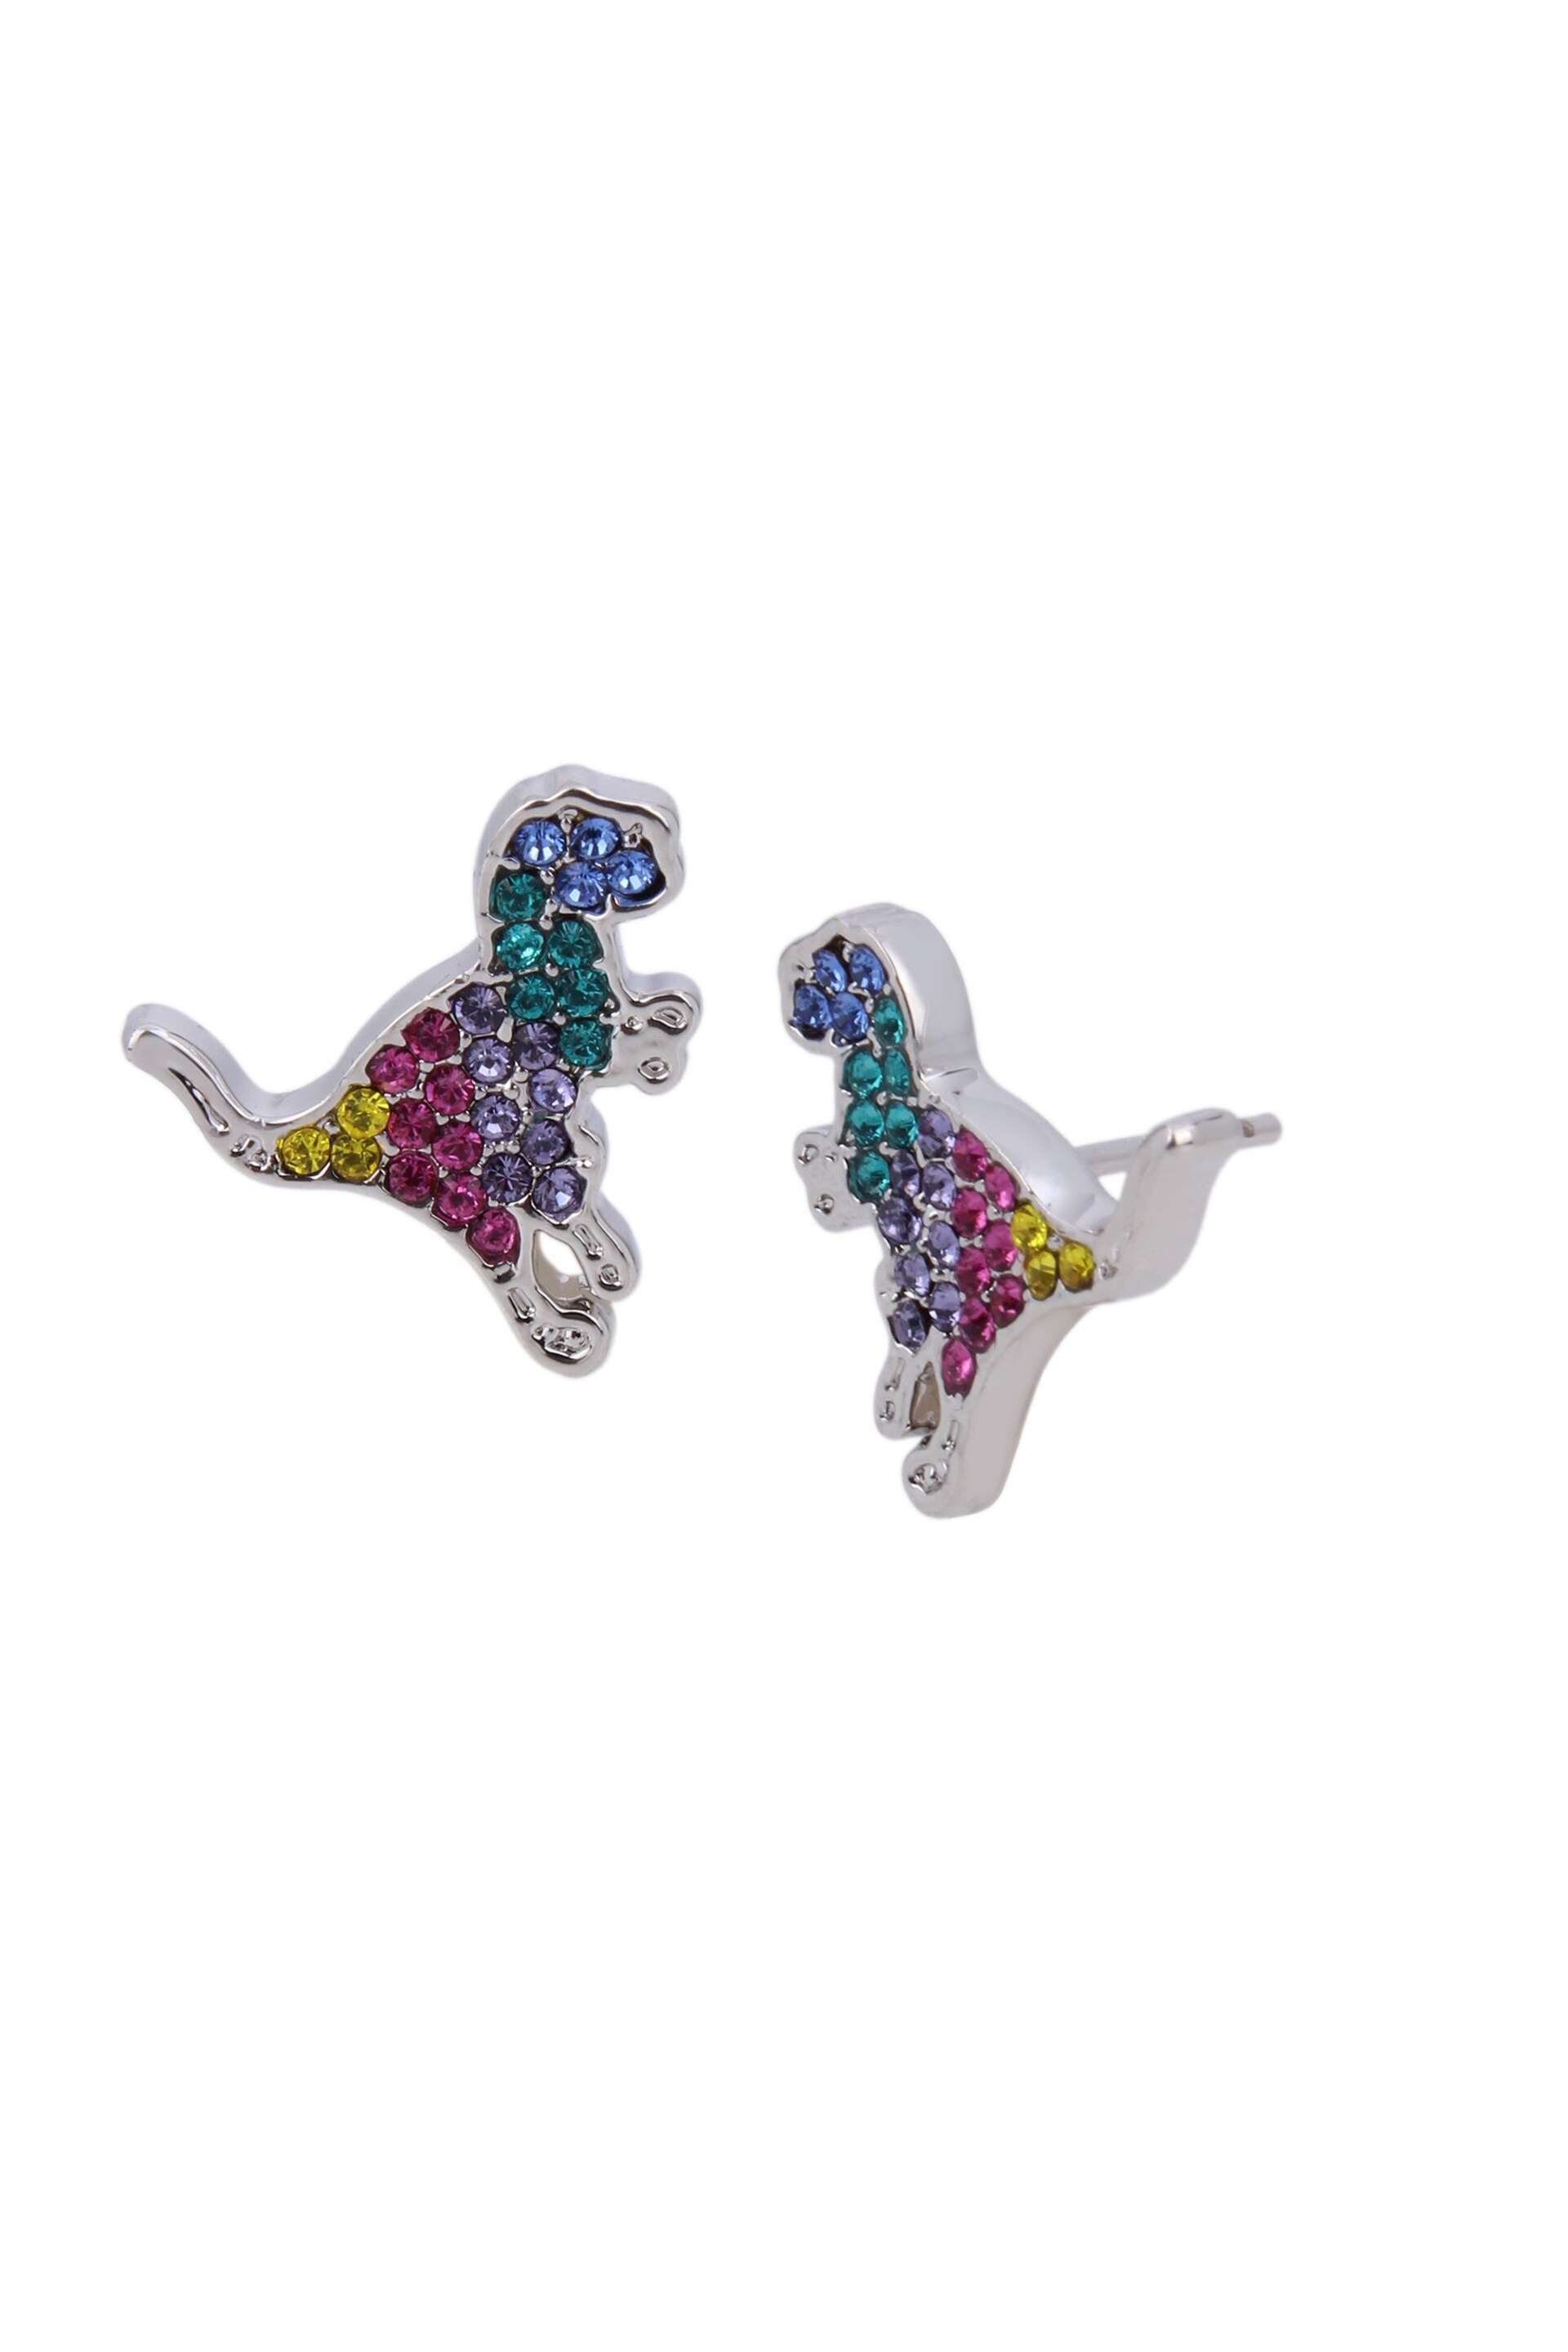 COACH Signature Rexy Stud Earrings - Image 1 of 1